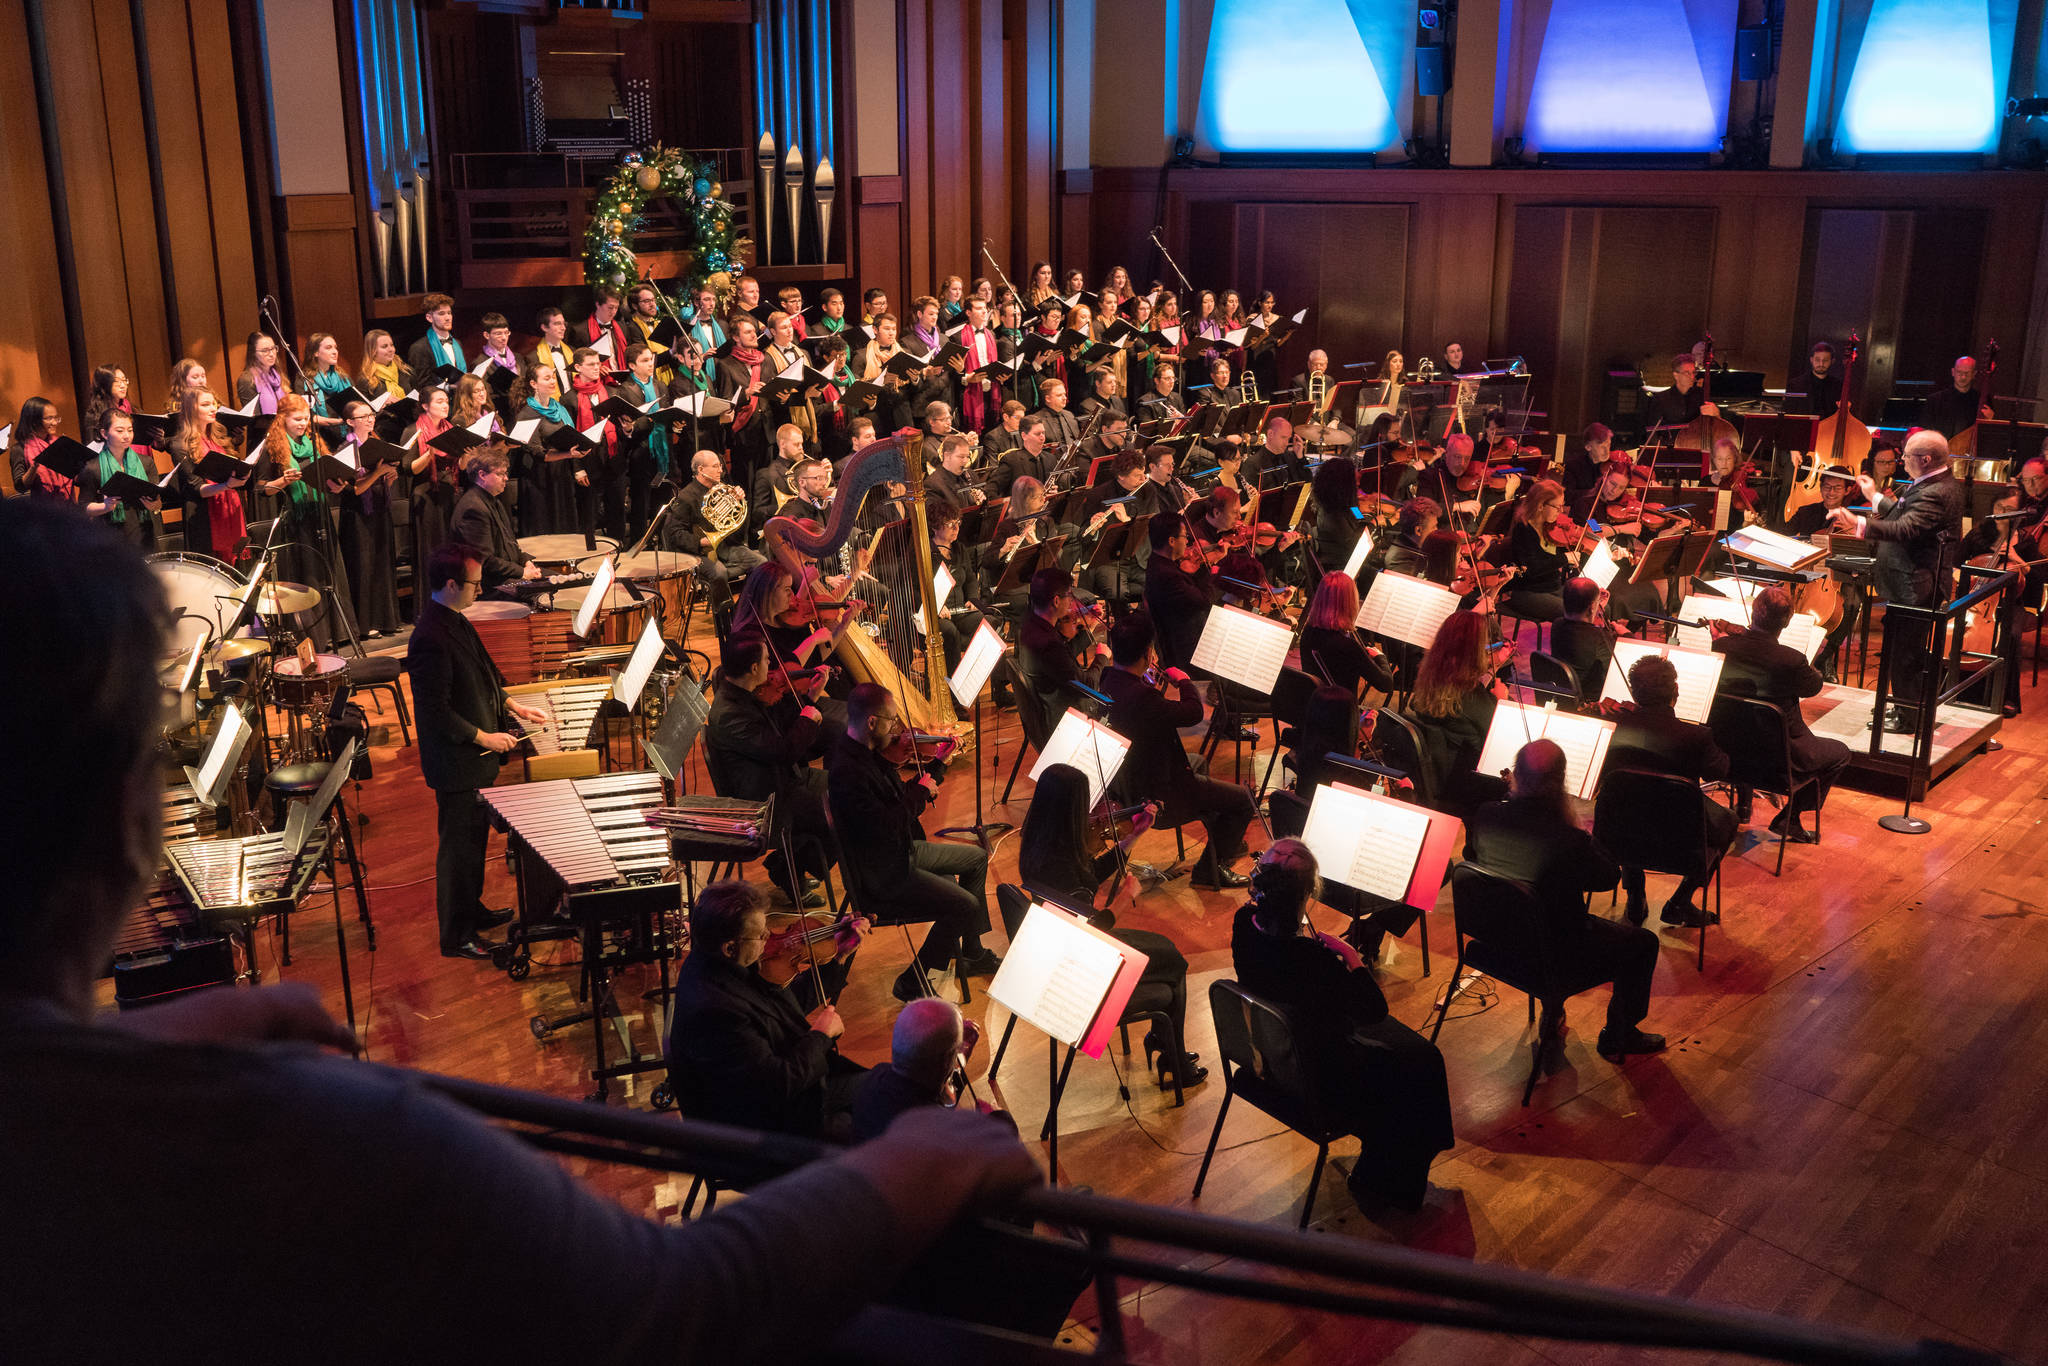 The Holiday Pops concert is just one of Seattle Symphony’s many festive options at Benaroya Hall. Photo by Brandon Patoc